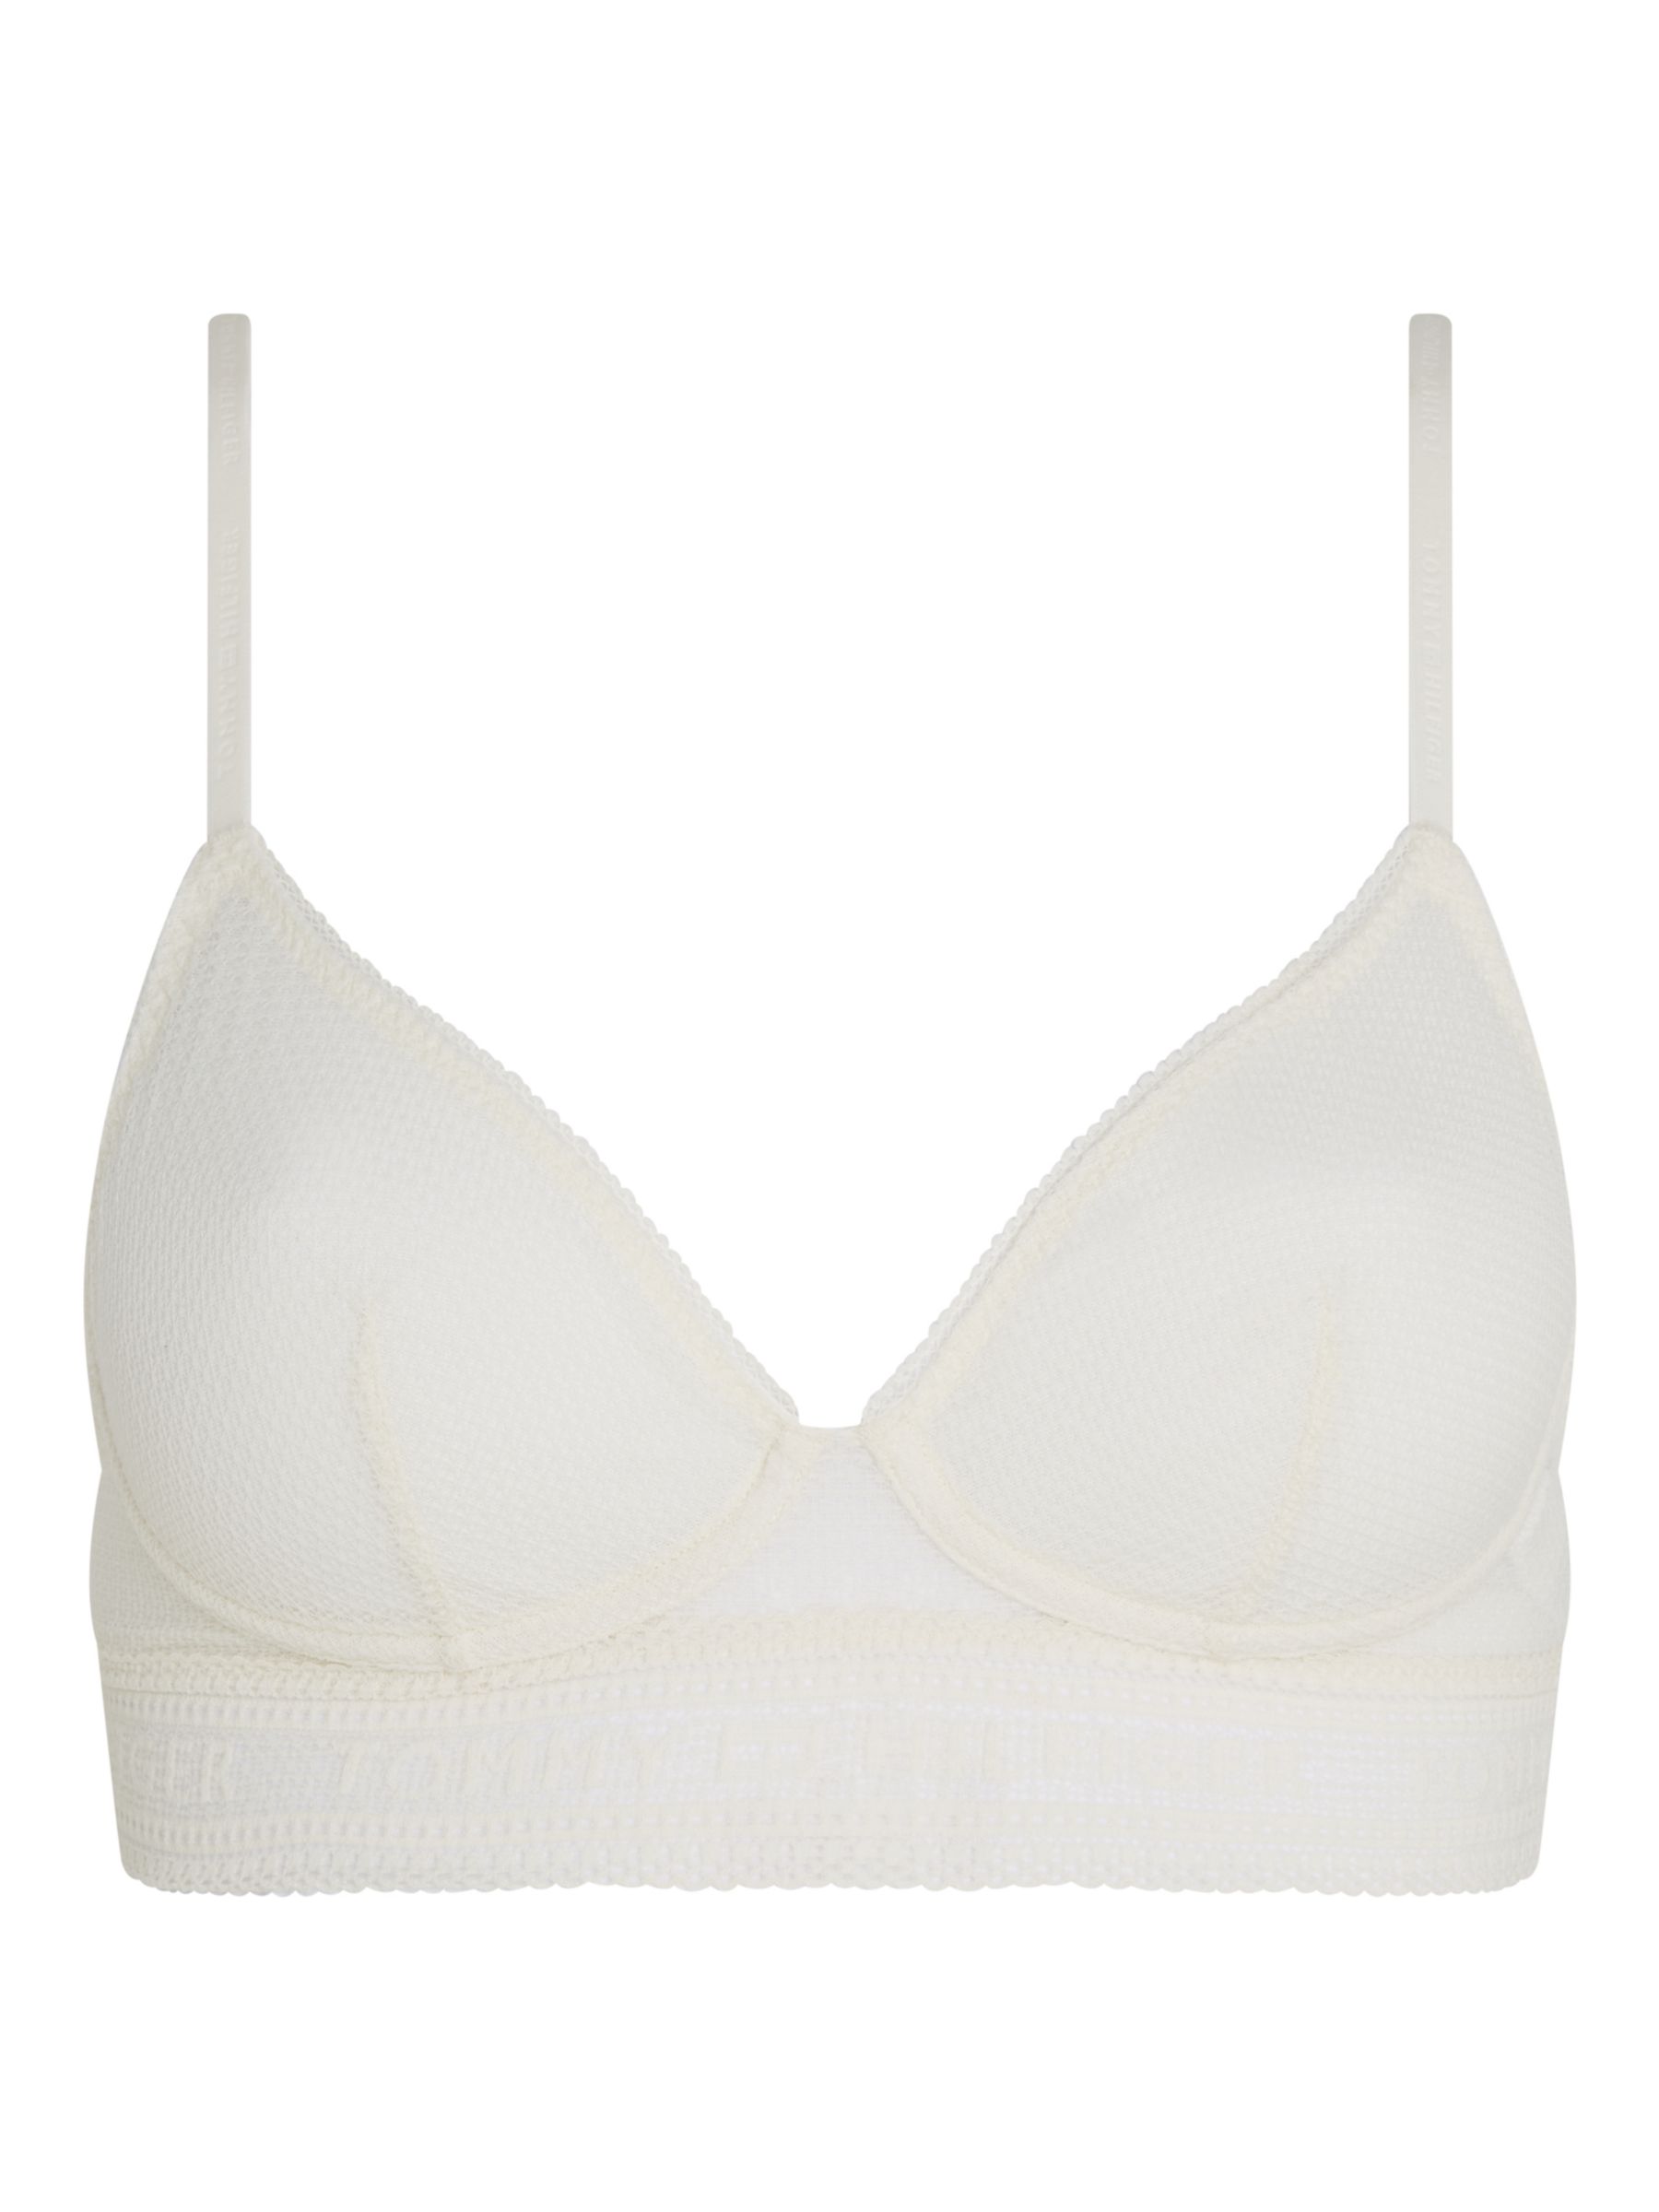 Buy Tommy Hilfiger Unlined Triangle Mesh Bra, Ivory Online at johnlewis.com